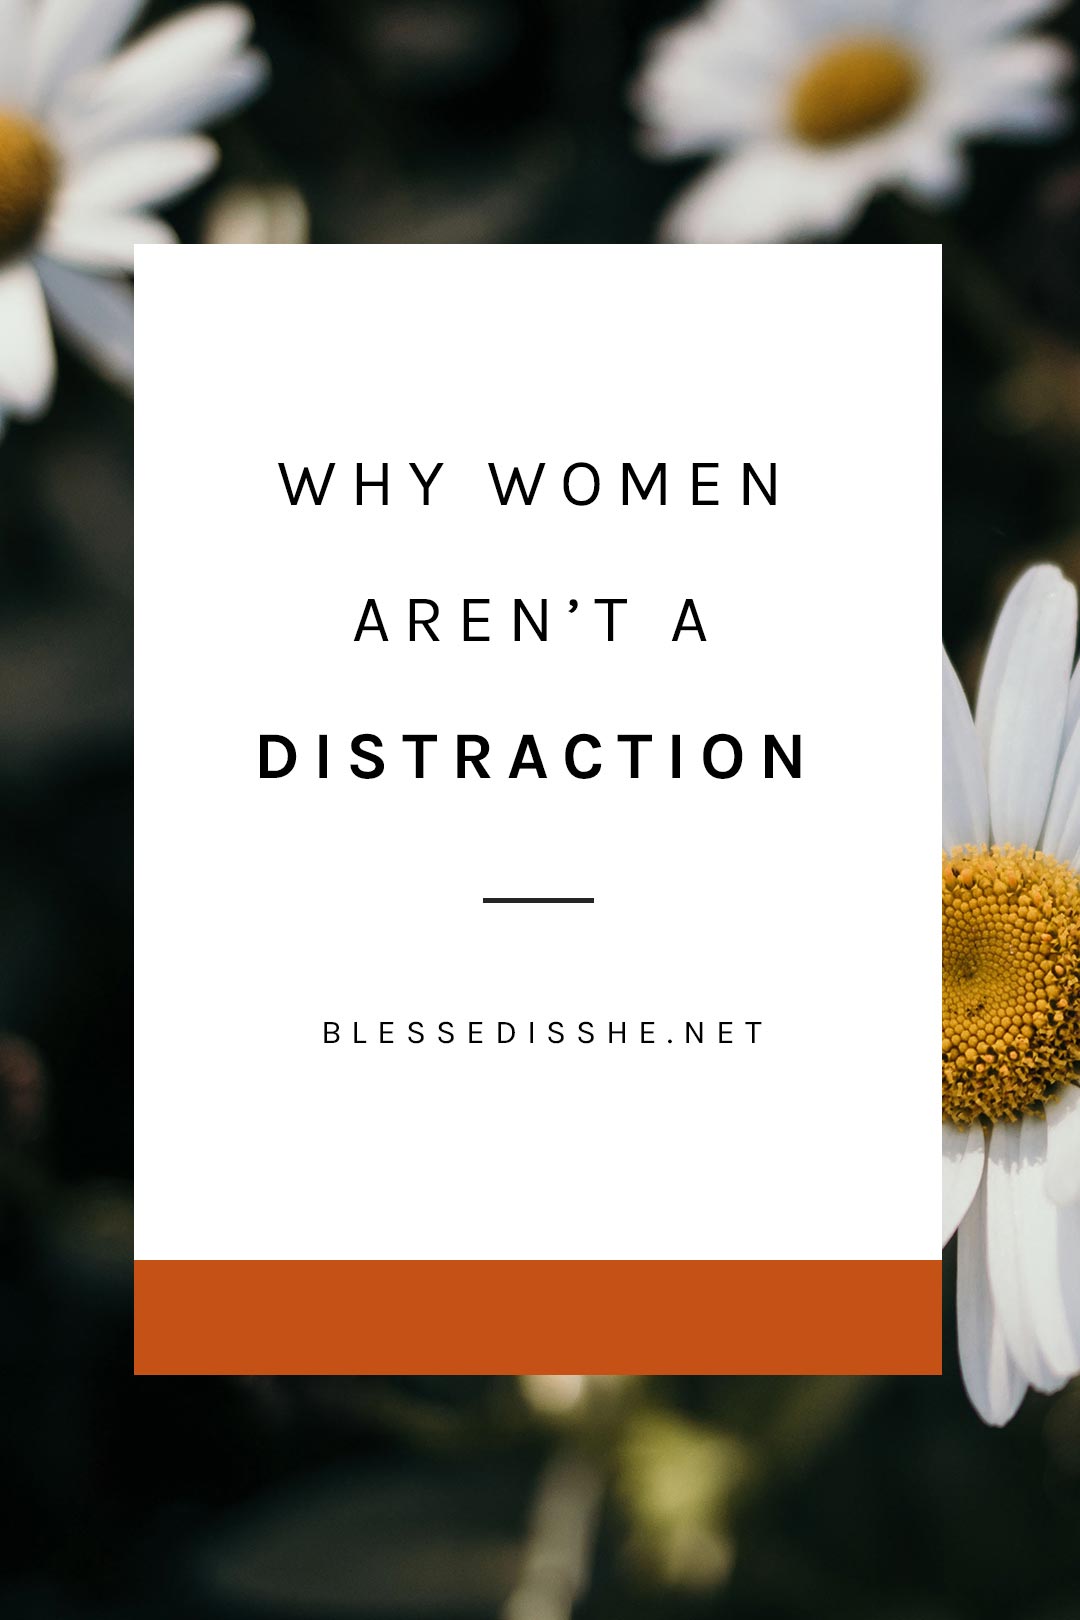 Why Women Aren't a Distraction: A Reflection